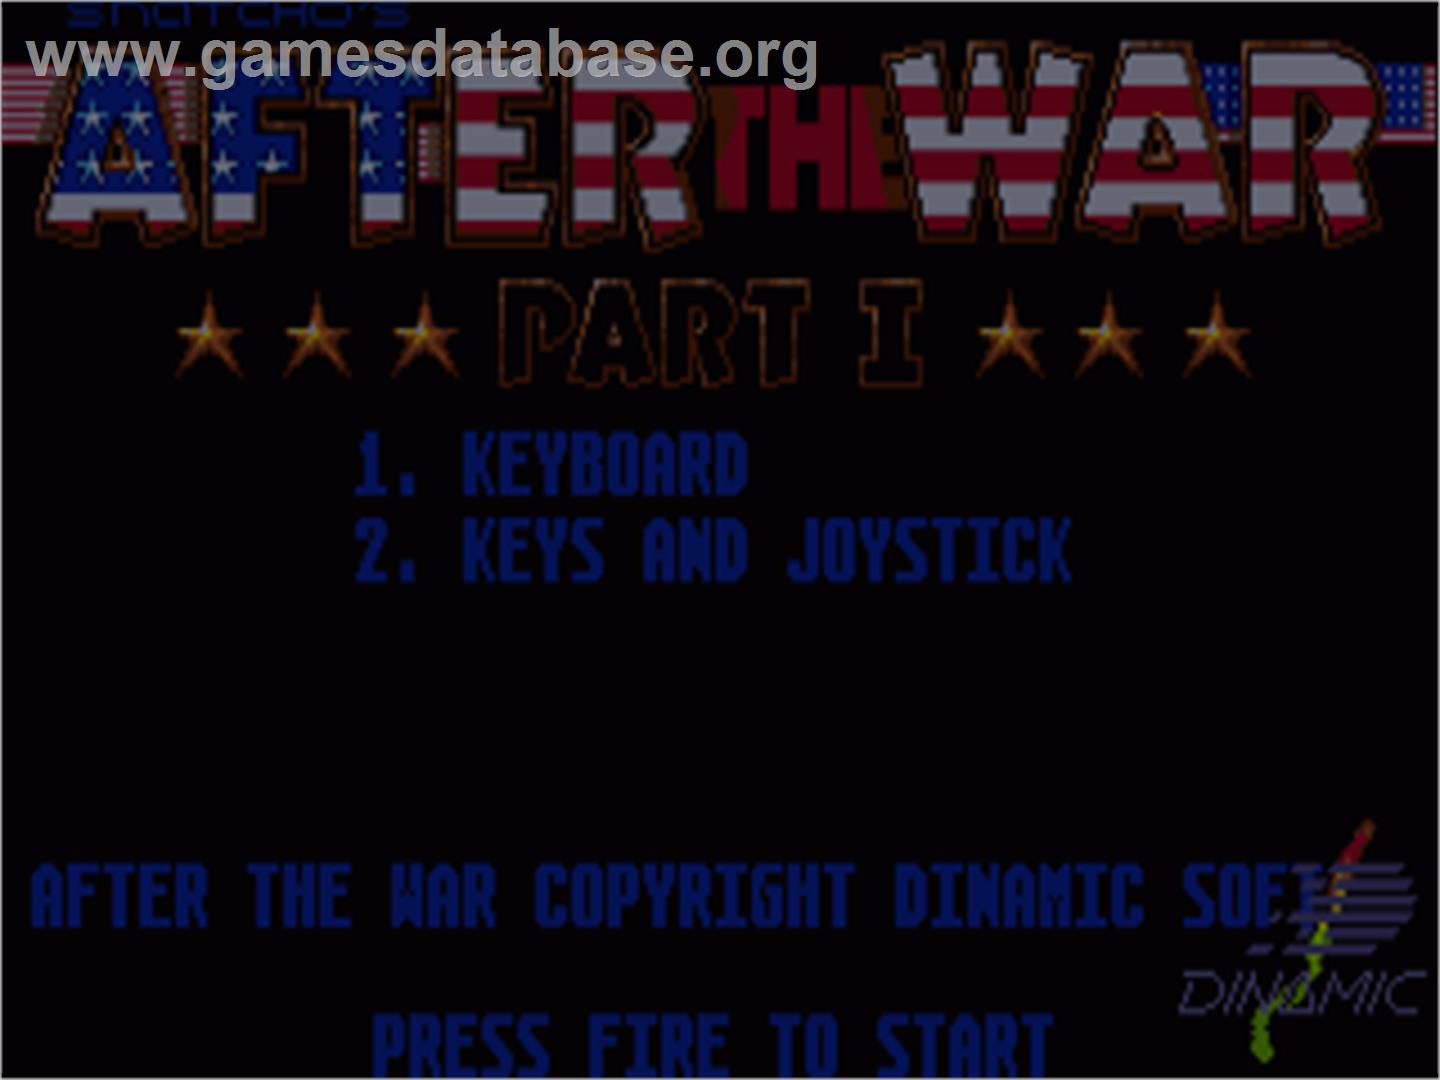 After the War - Commodore Amiga - Artwork - Title Screen